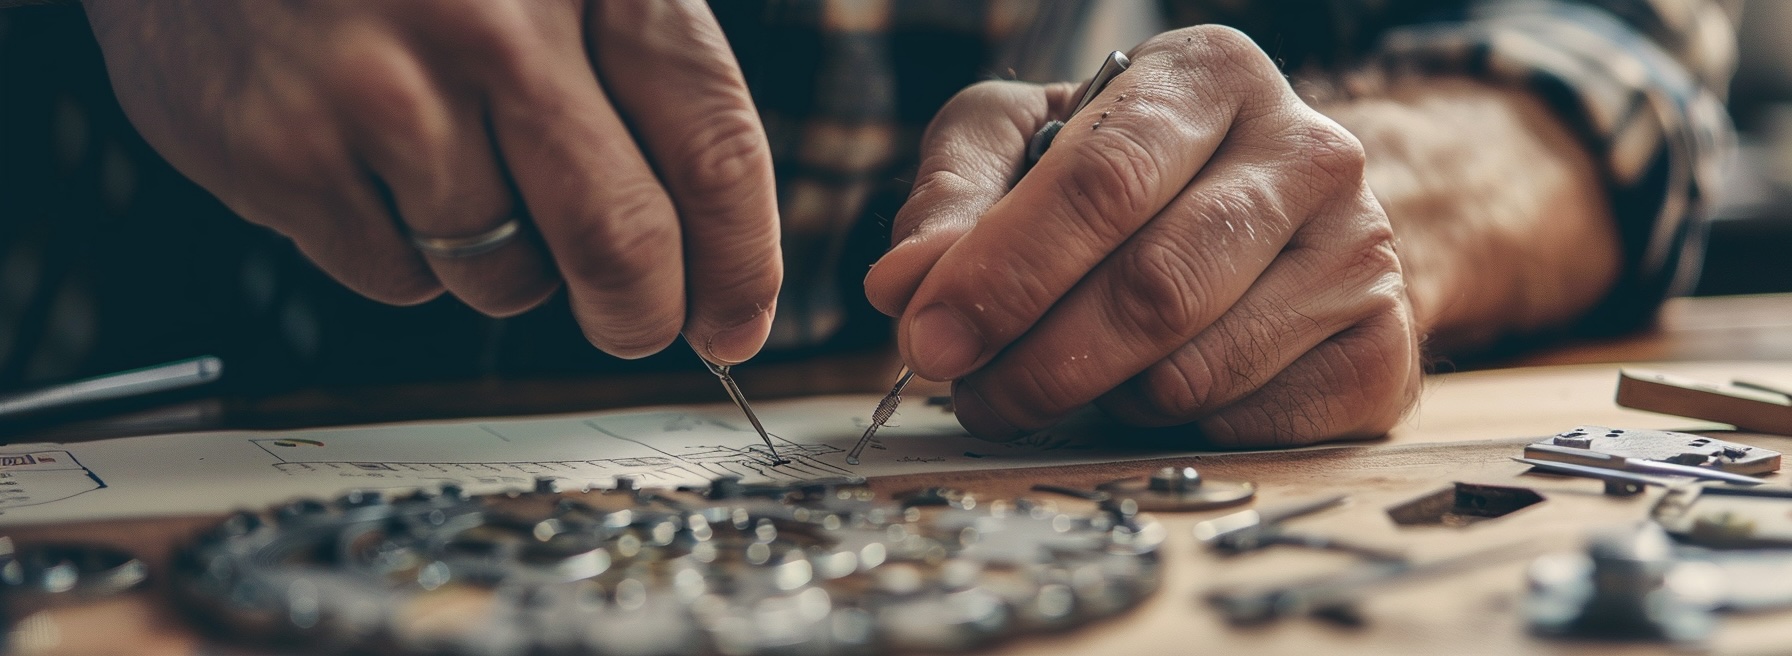 A craftsman's hands working on tools.